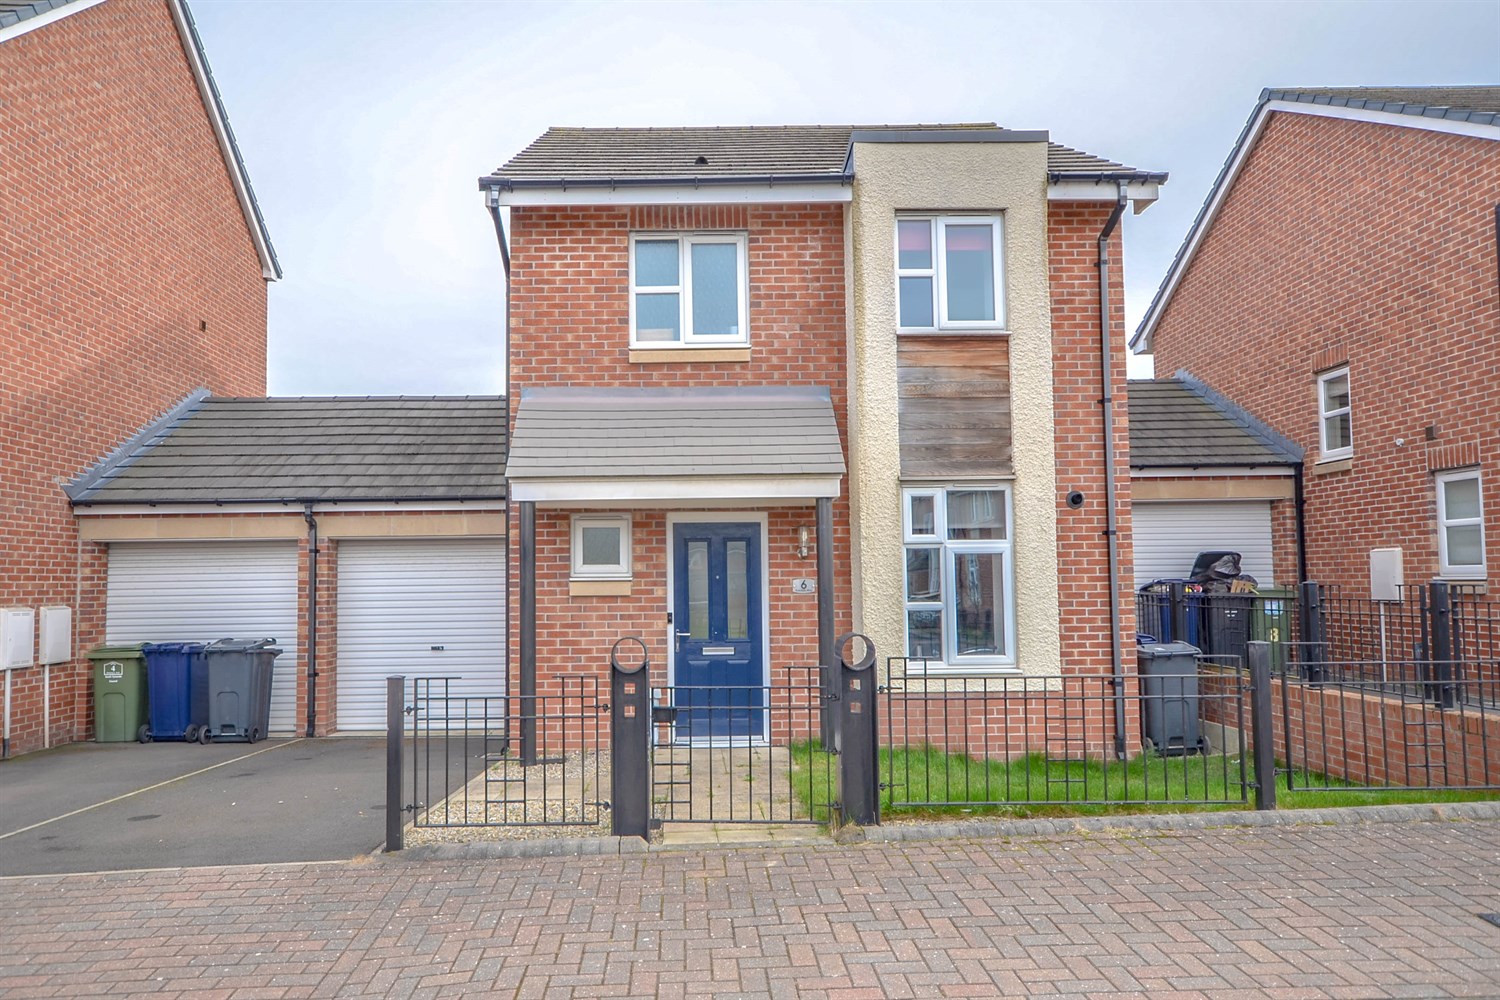 3 bed link detached house for sale in Ryedale Way, South Shields - Property Image 1